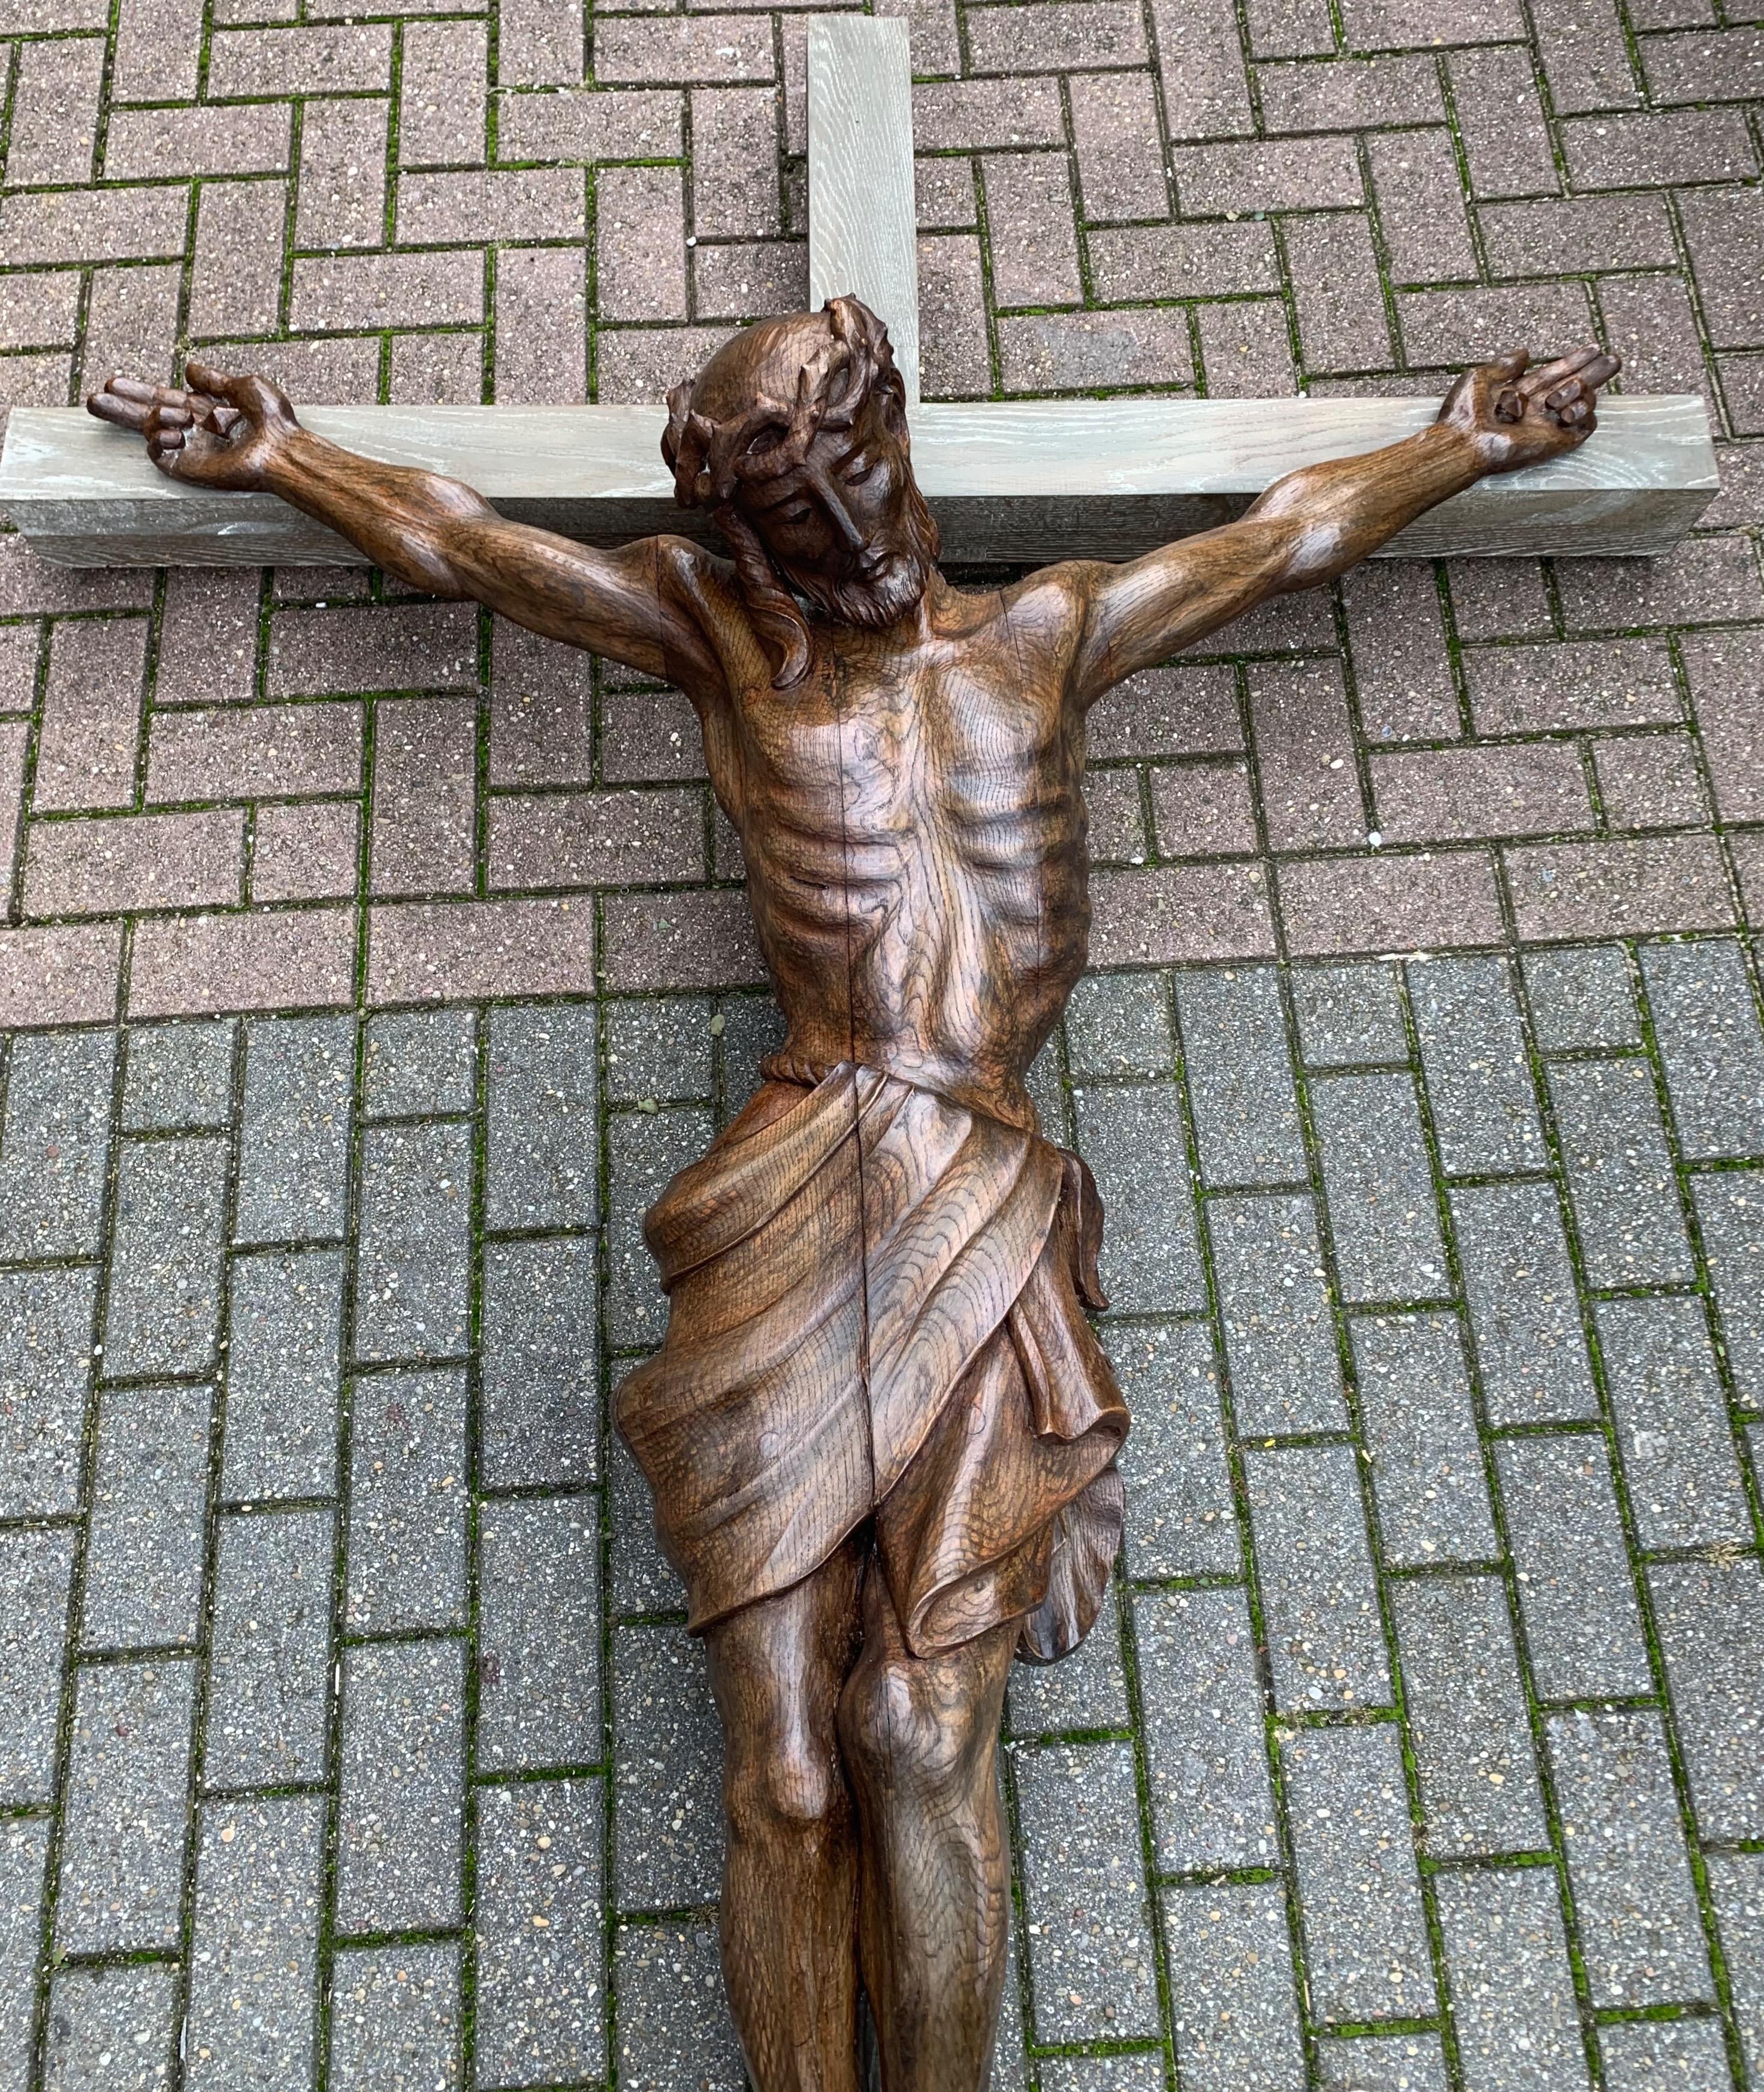 Beautifully carved and large size corpus of Jesus, made in the Arts & Crafts era.

This meaningful and unique crucifix from the early 1900s comes with a larger than life, hand carved oak Corpus of Christ. The details in the anatomy of this Christ